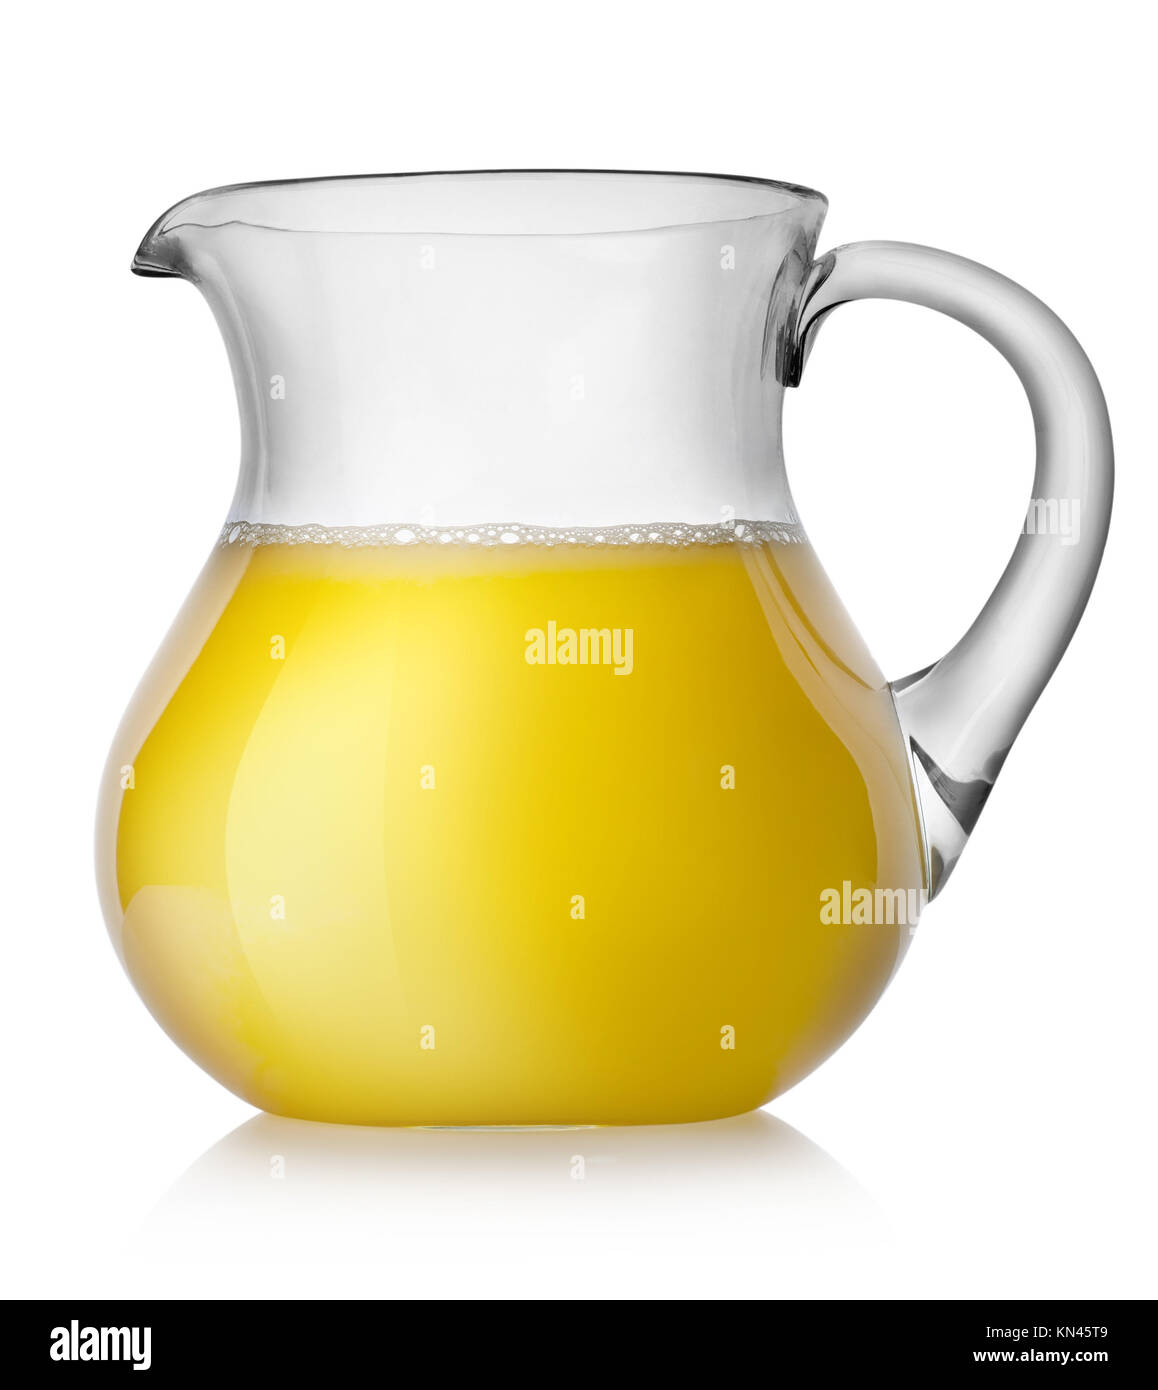 https://c8.alamy.com/comp/KN45T9/orange-juice-in-a-jug-isolated-on-white-background-KN45T9.jpg